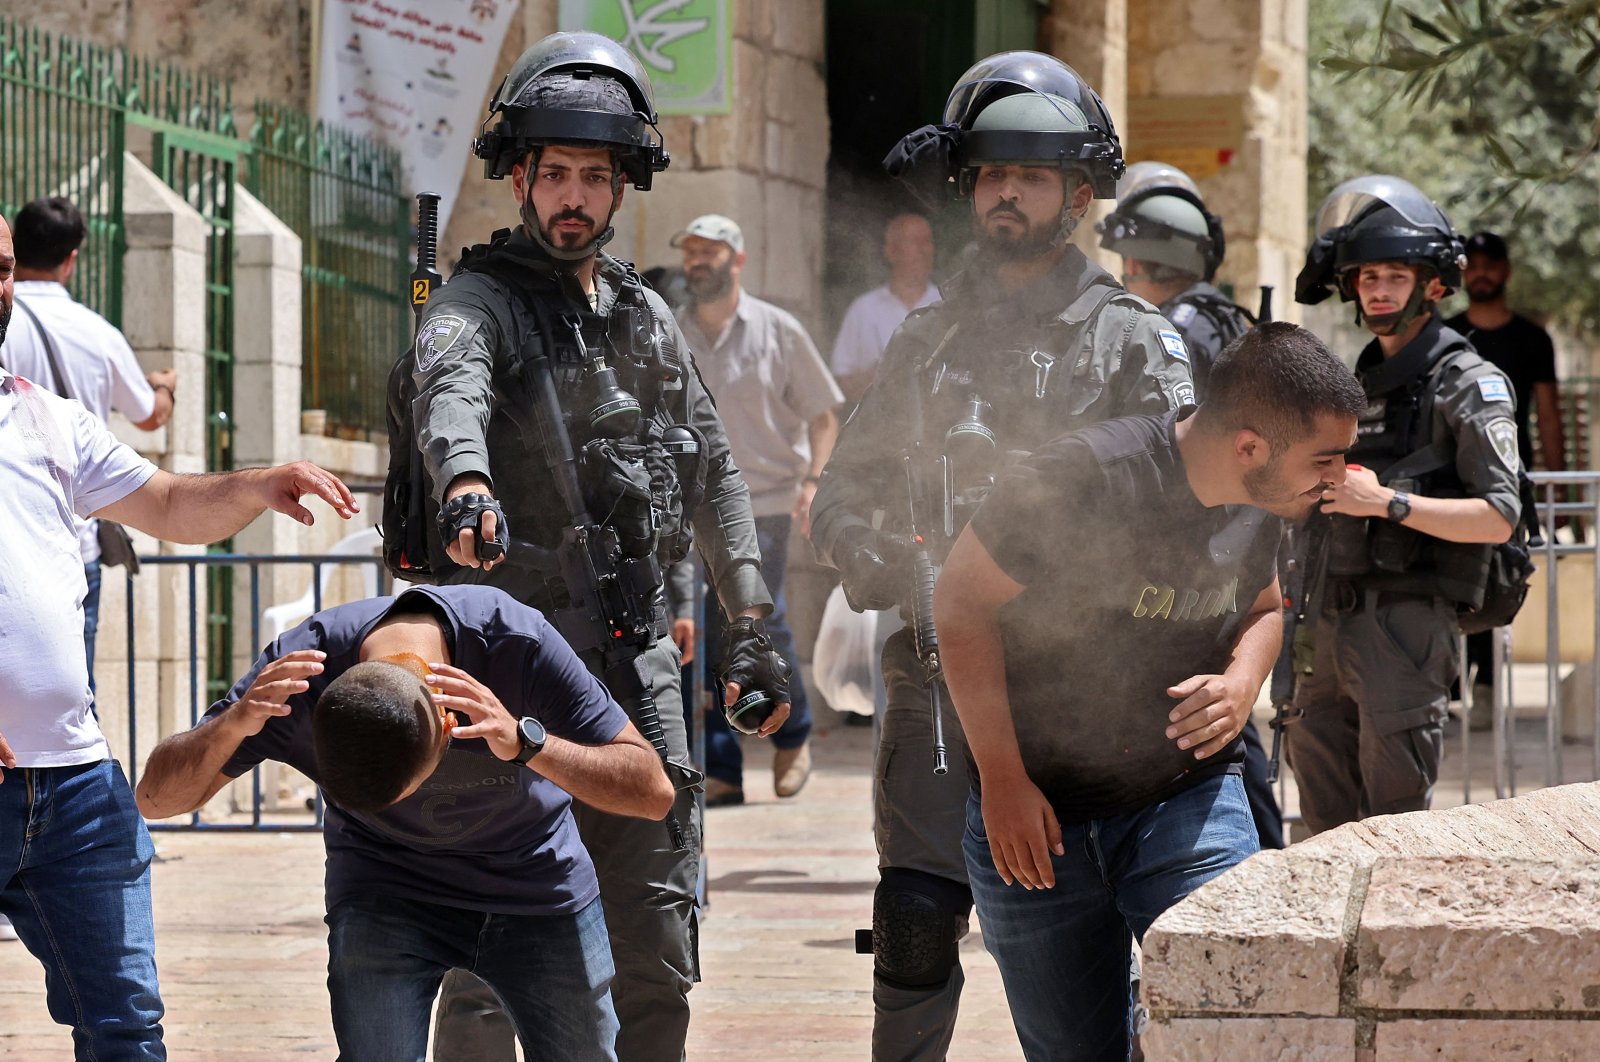 Israeli security forces spray Palestinian protesters in Jerusalem's Old City on May 10, 2021, as a planned march marking Israel's 1967 takeover of the holy city threatened to further inflame tensions. (AFP Photo)